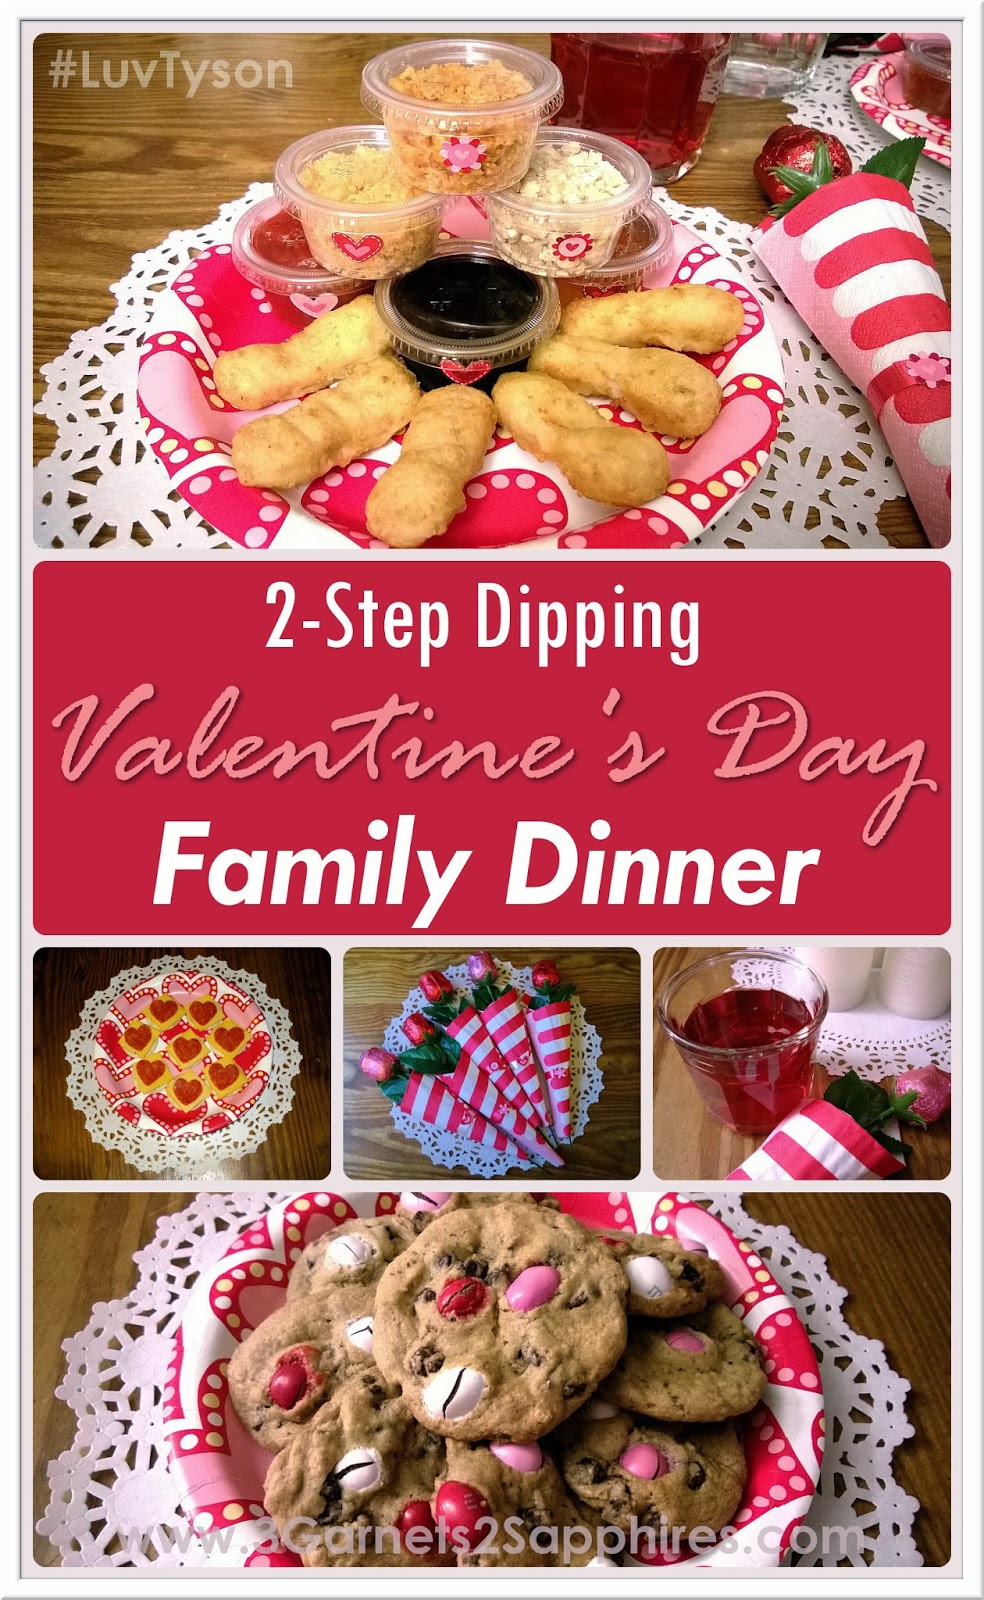 #ad: How to Have an Easy 2-Step Dipping Valentines Day Family Dinner #LuvTyson #cbias